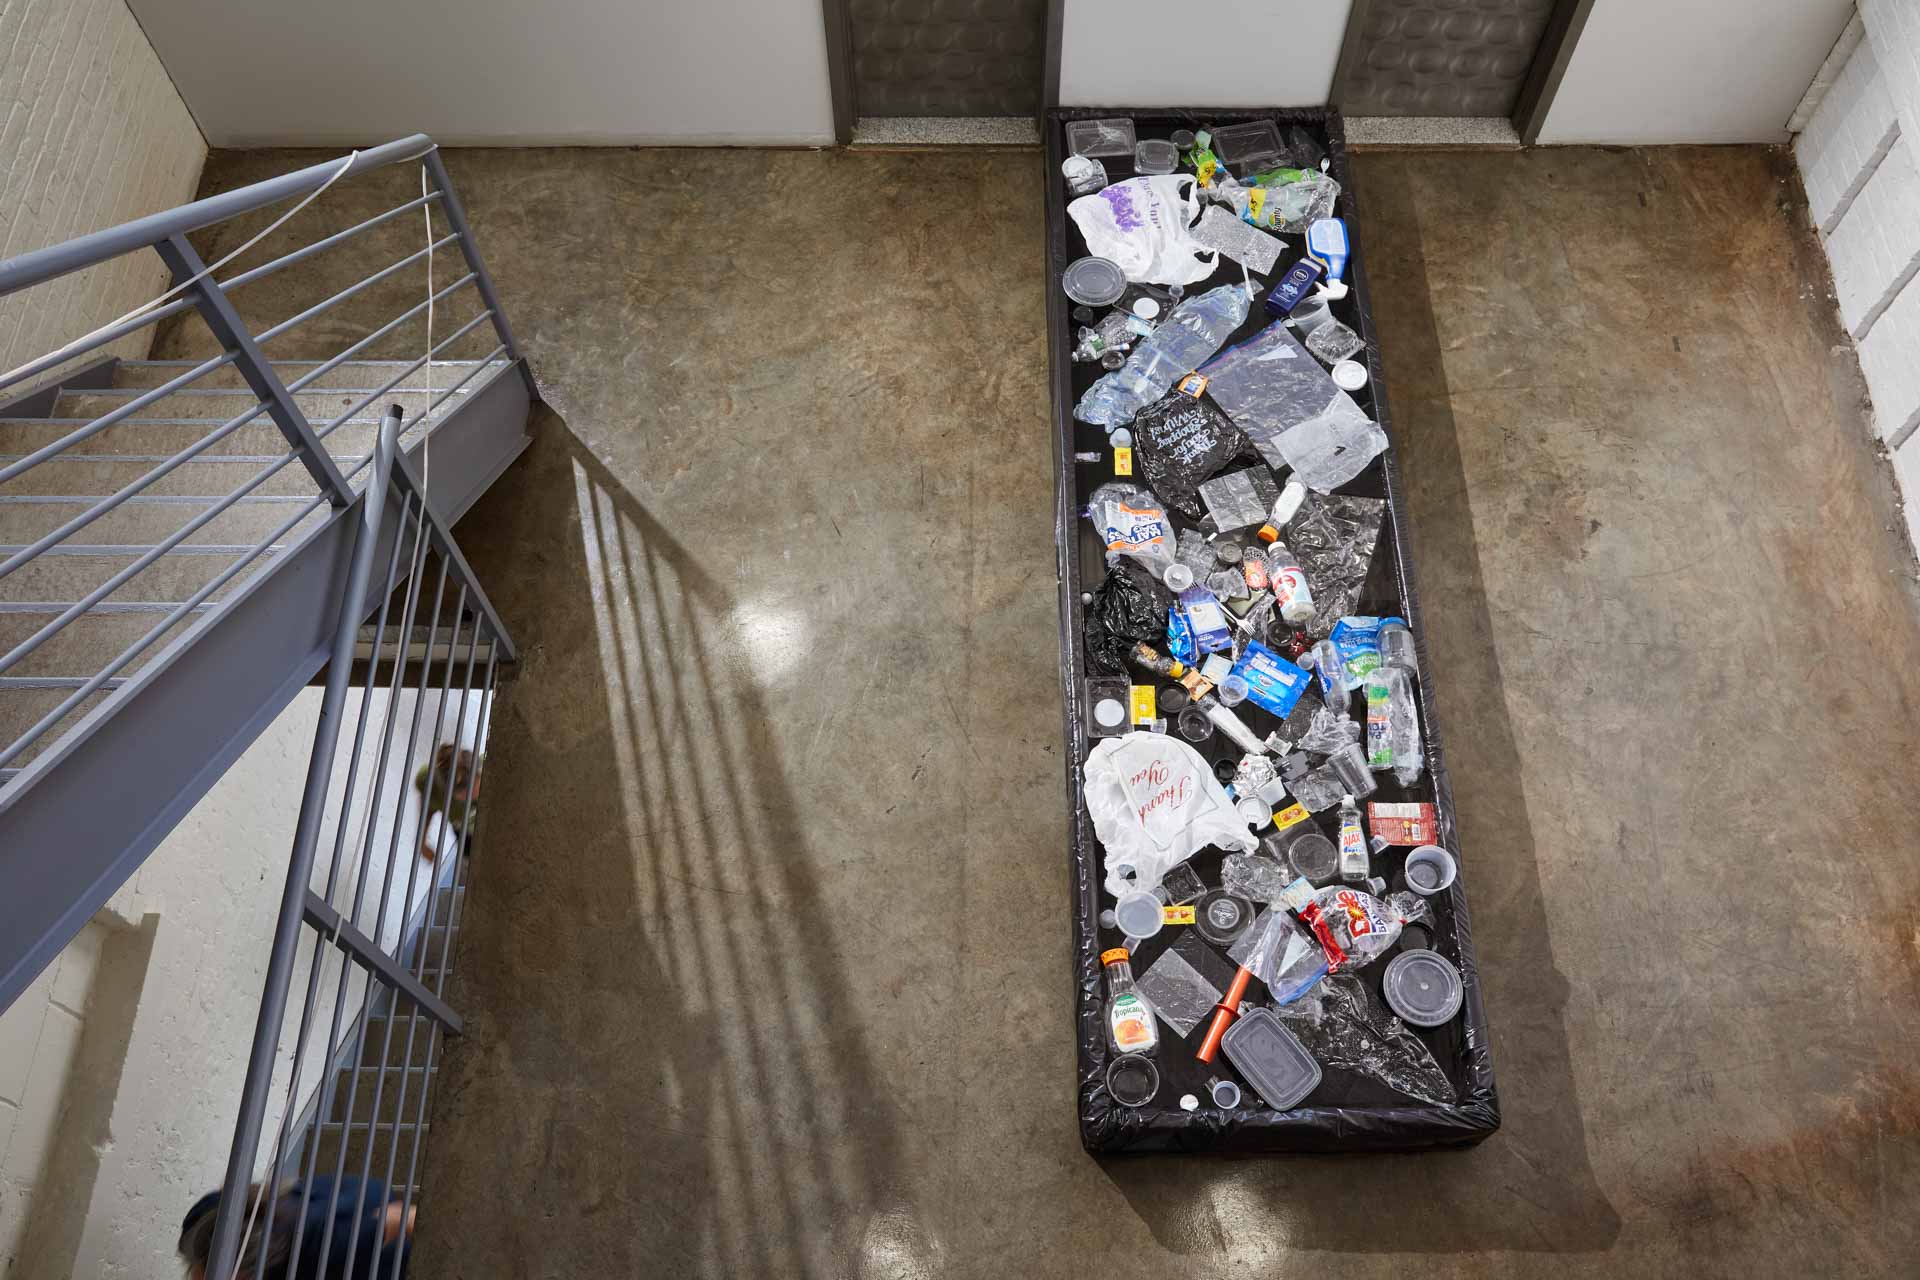 Photograph of top-down view taken from a top a staircase. On the floor below is a ten by three foot small pool, one foot high, filled with water and over a hundred single use plastic items. The pool has a black lining so the water appears black. 